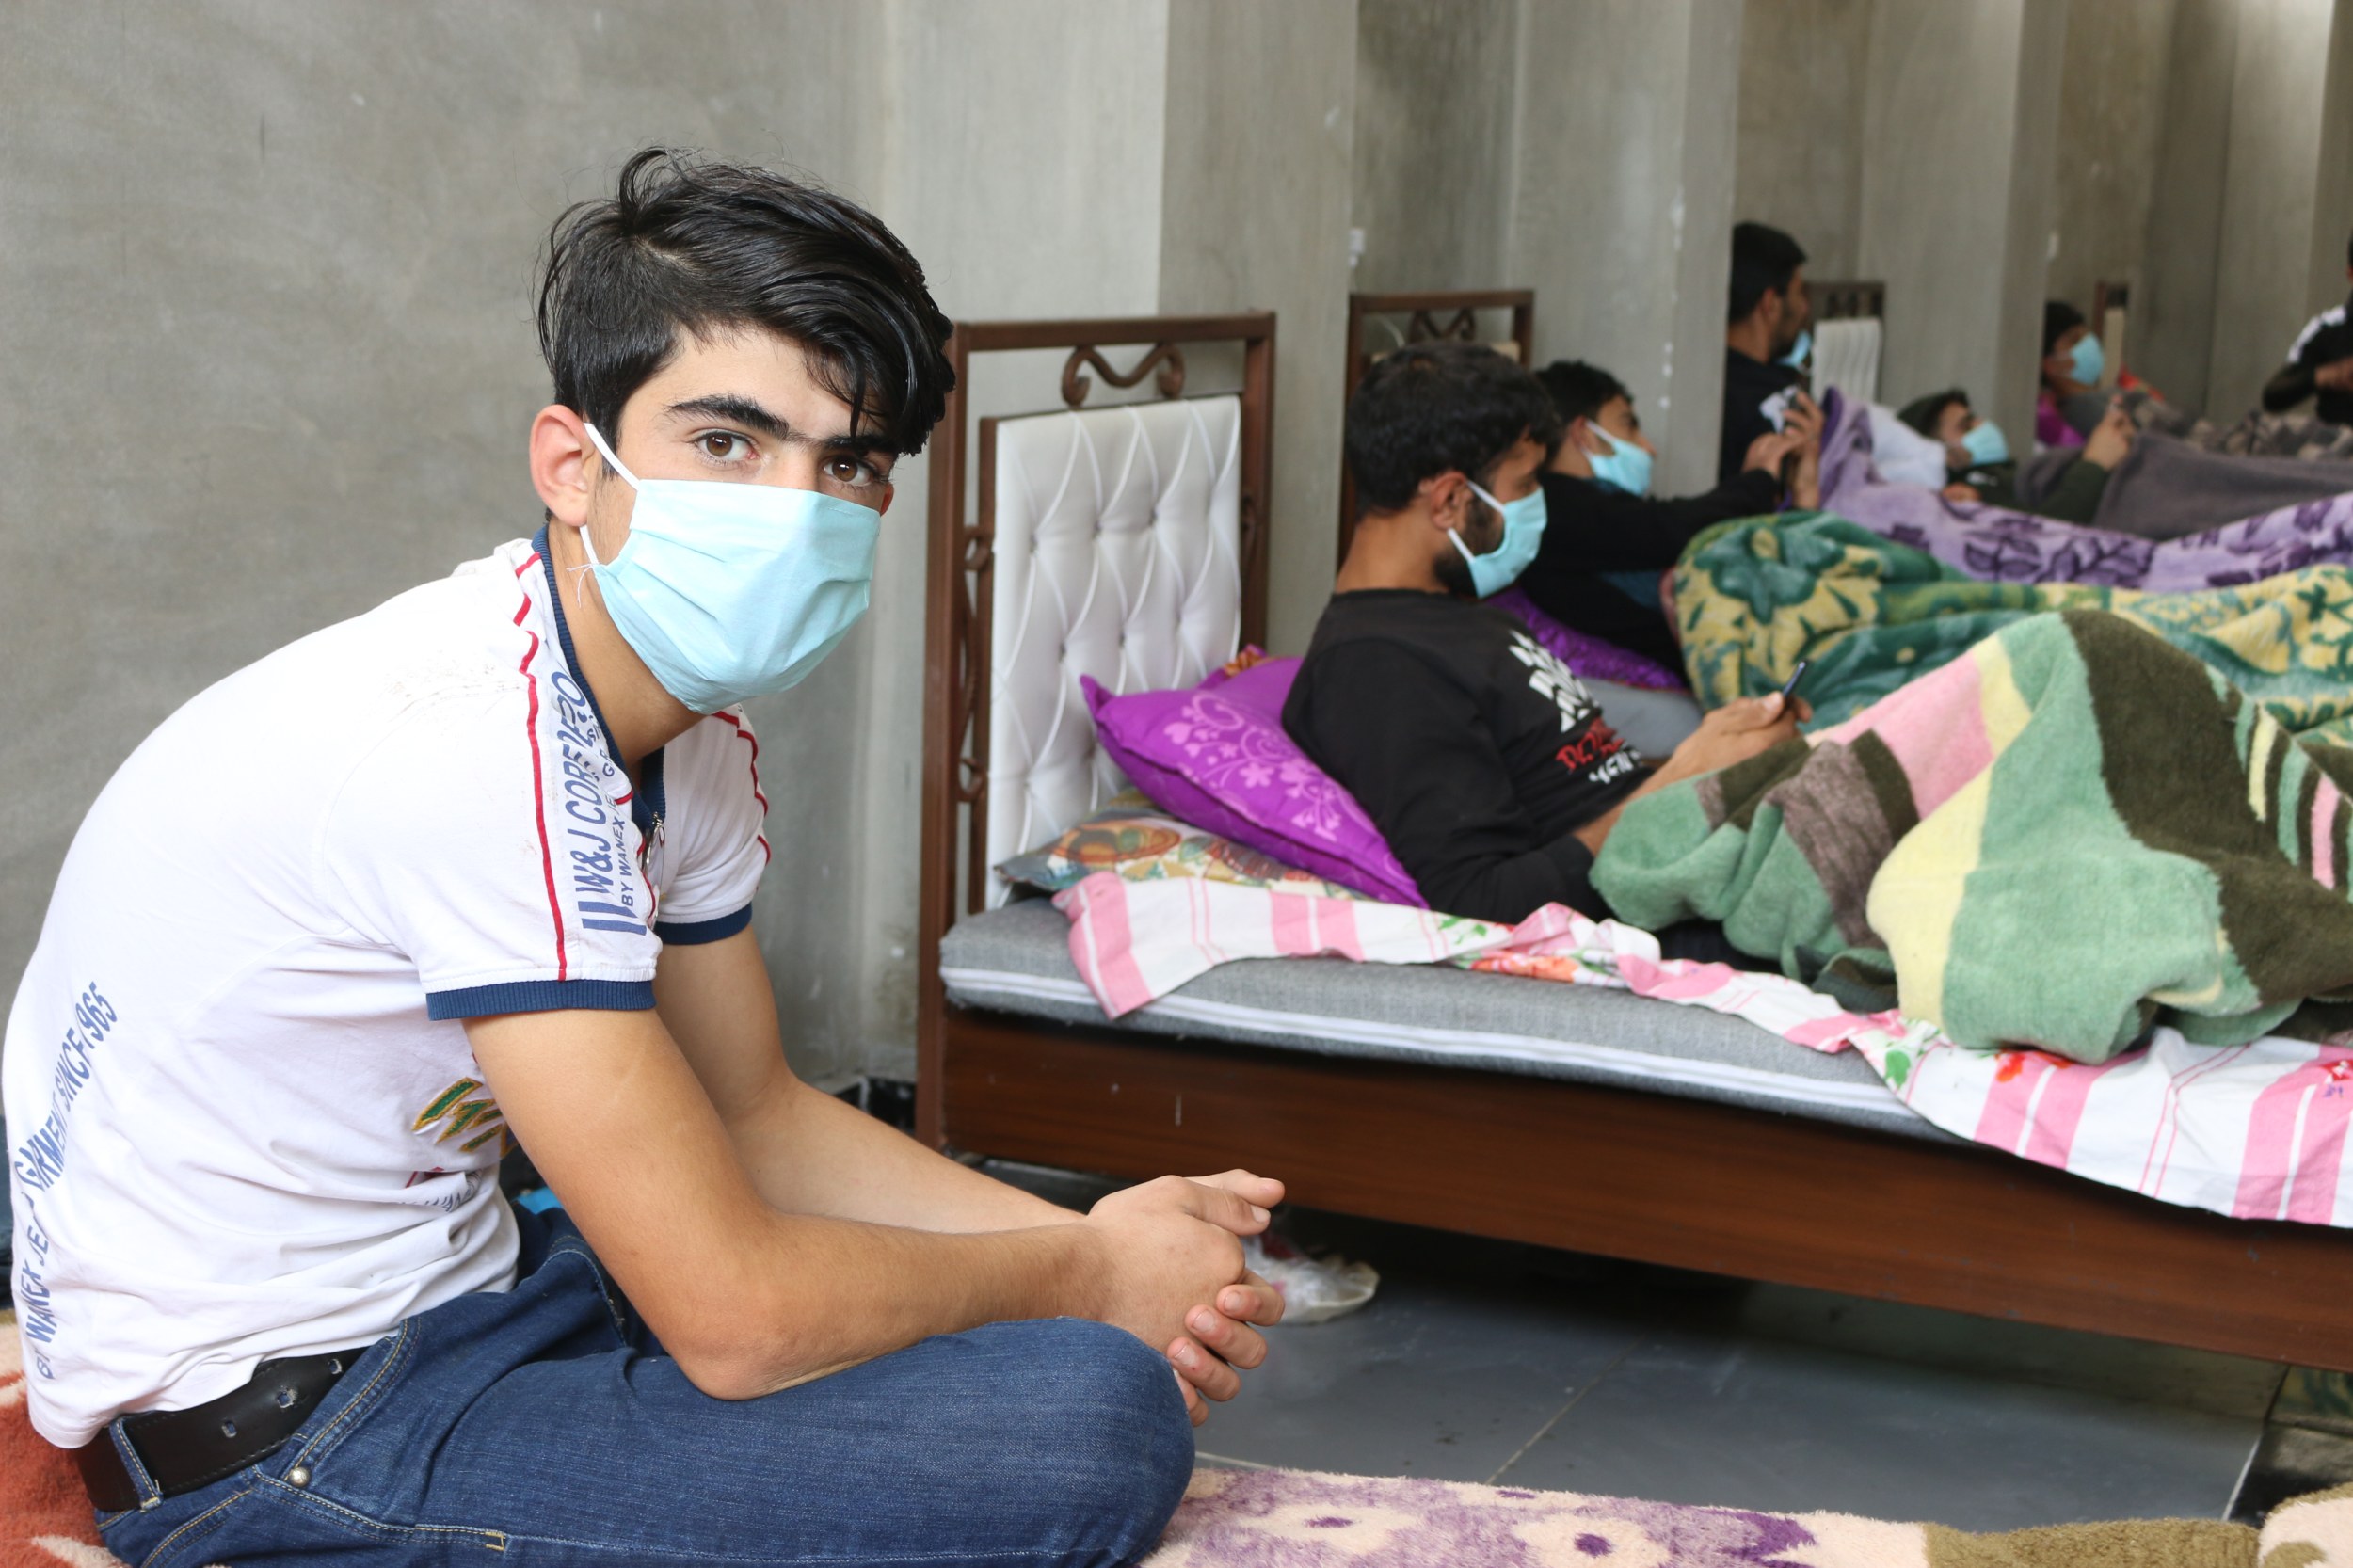 A patient at the quarantine centre looks on on 6 May 2020 (MEE/Mustafa Dahnon)